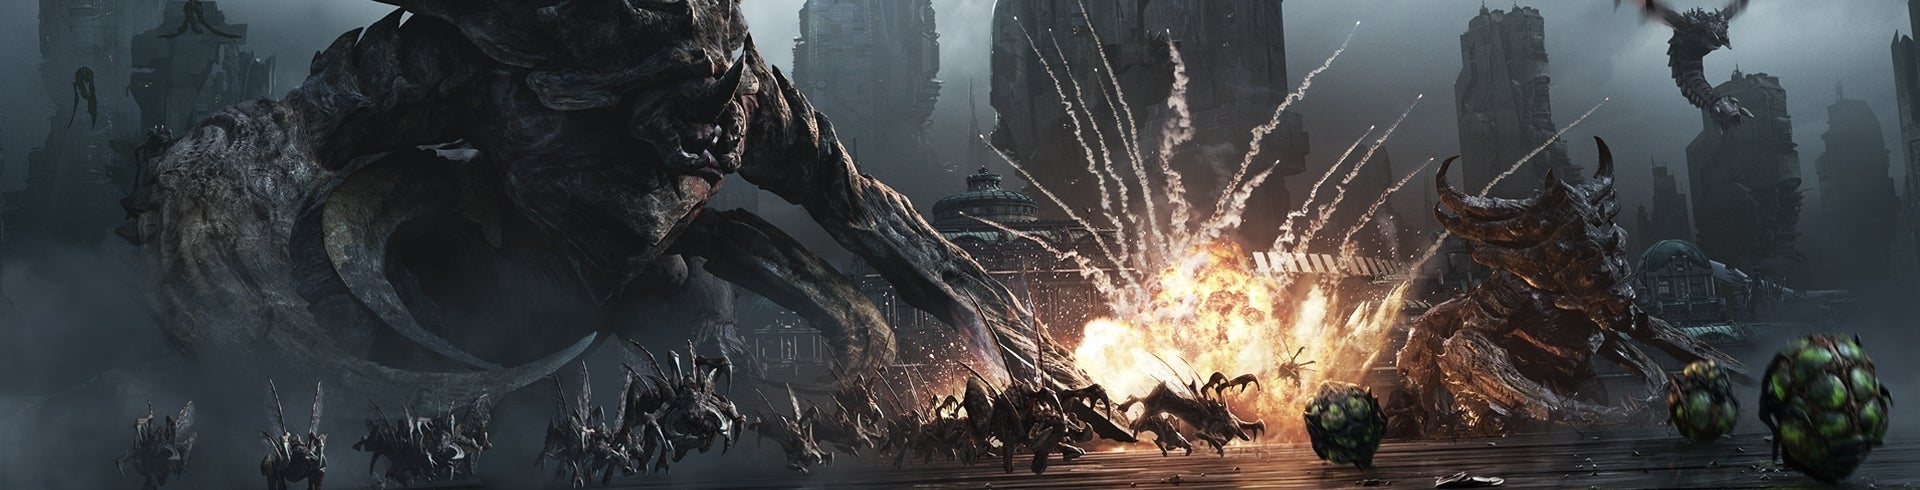 Image for Recenze StarCraft 2: Heart of the Swarm